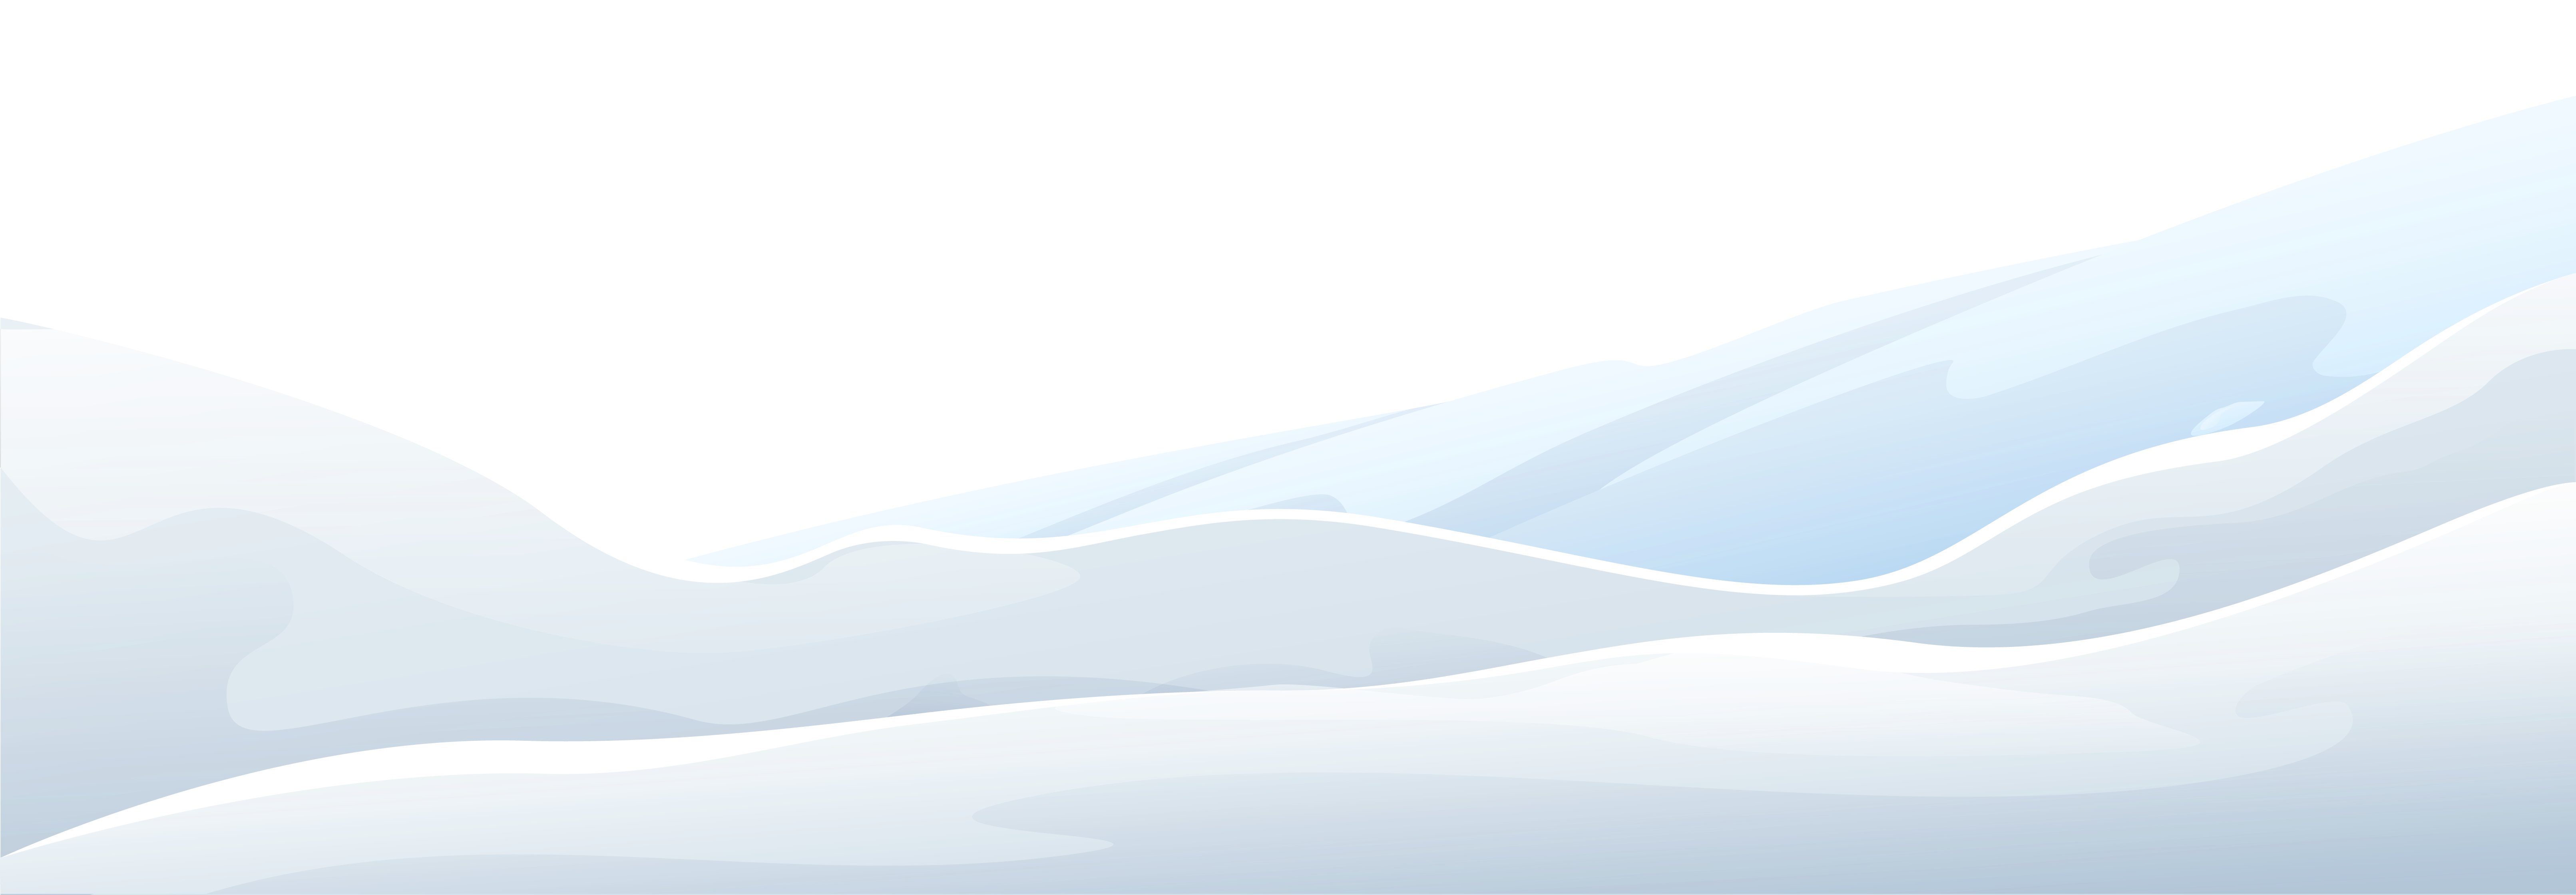 Floor clipart snowy. Snow winter ground png